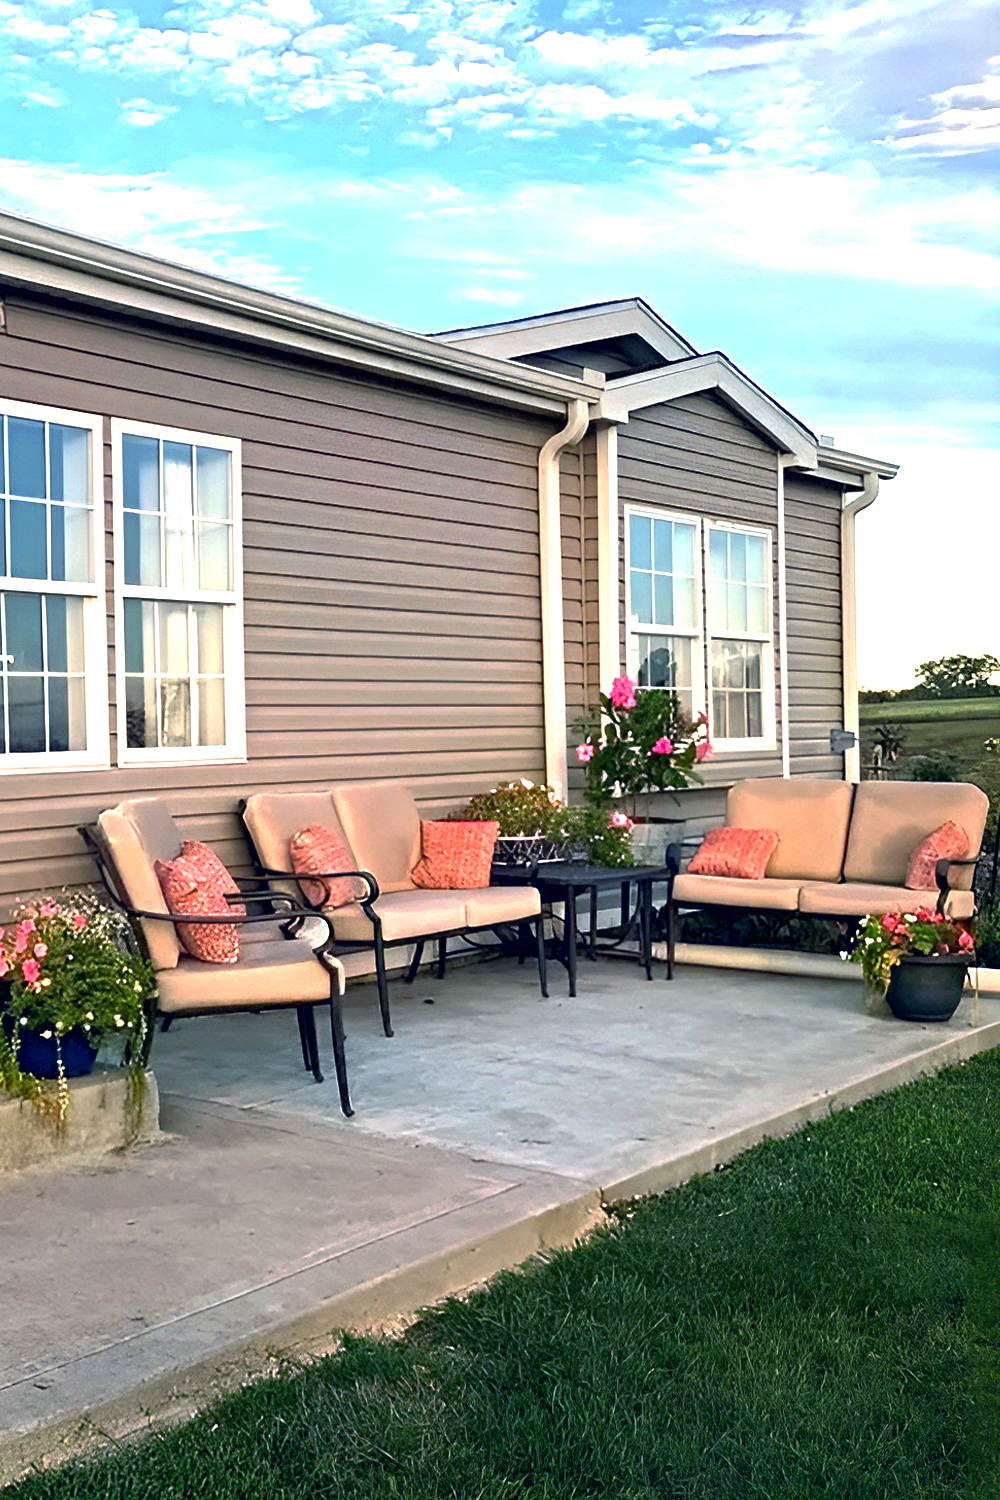 Exterior-Mobile-Home-Remodeling-Outdoor Seating Area